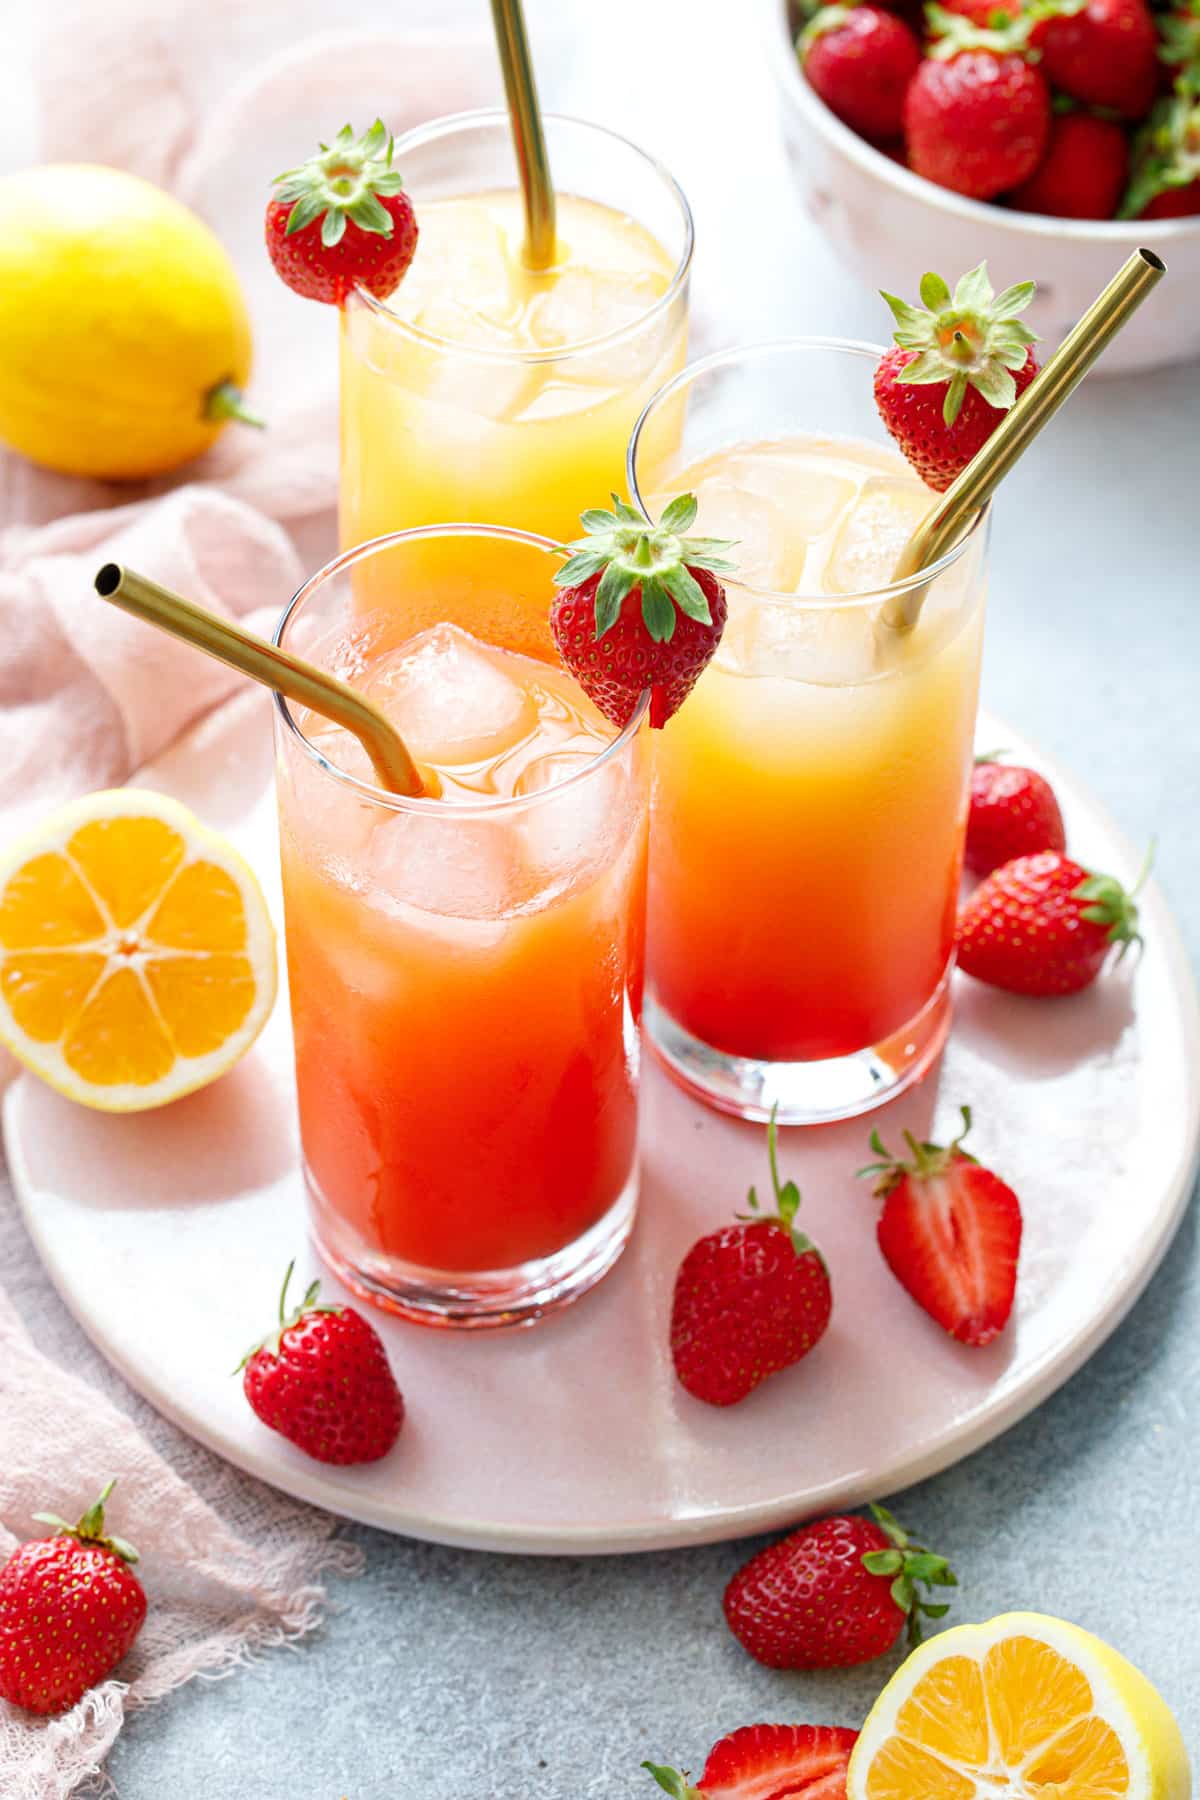 Three glasses of Strawberry Passionfruit Lemonade with metal straws, plus cut lemons and strawberries and a bowl of berries in the background.